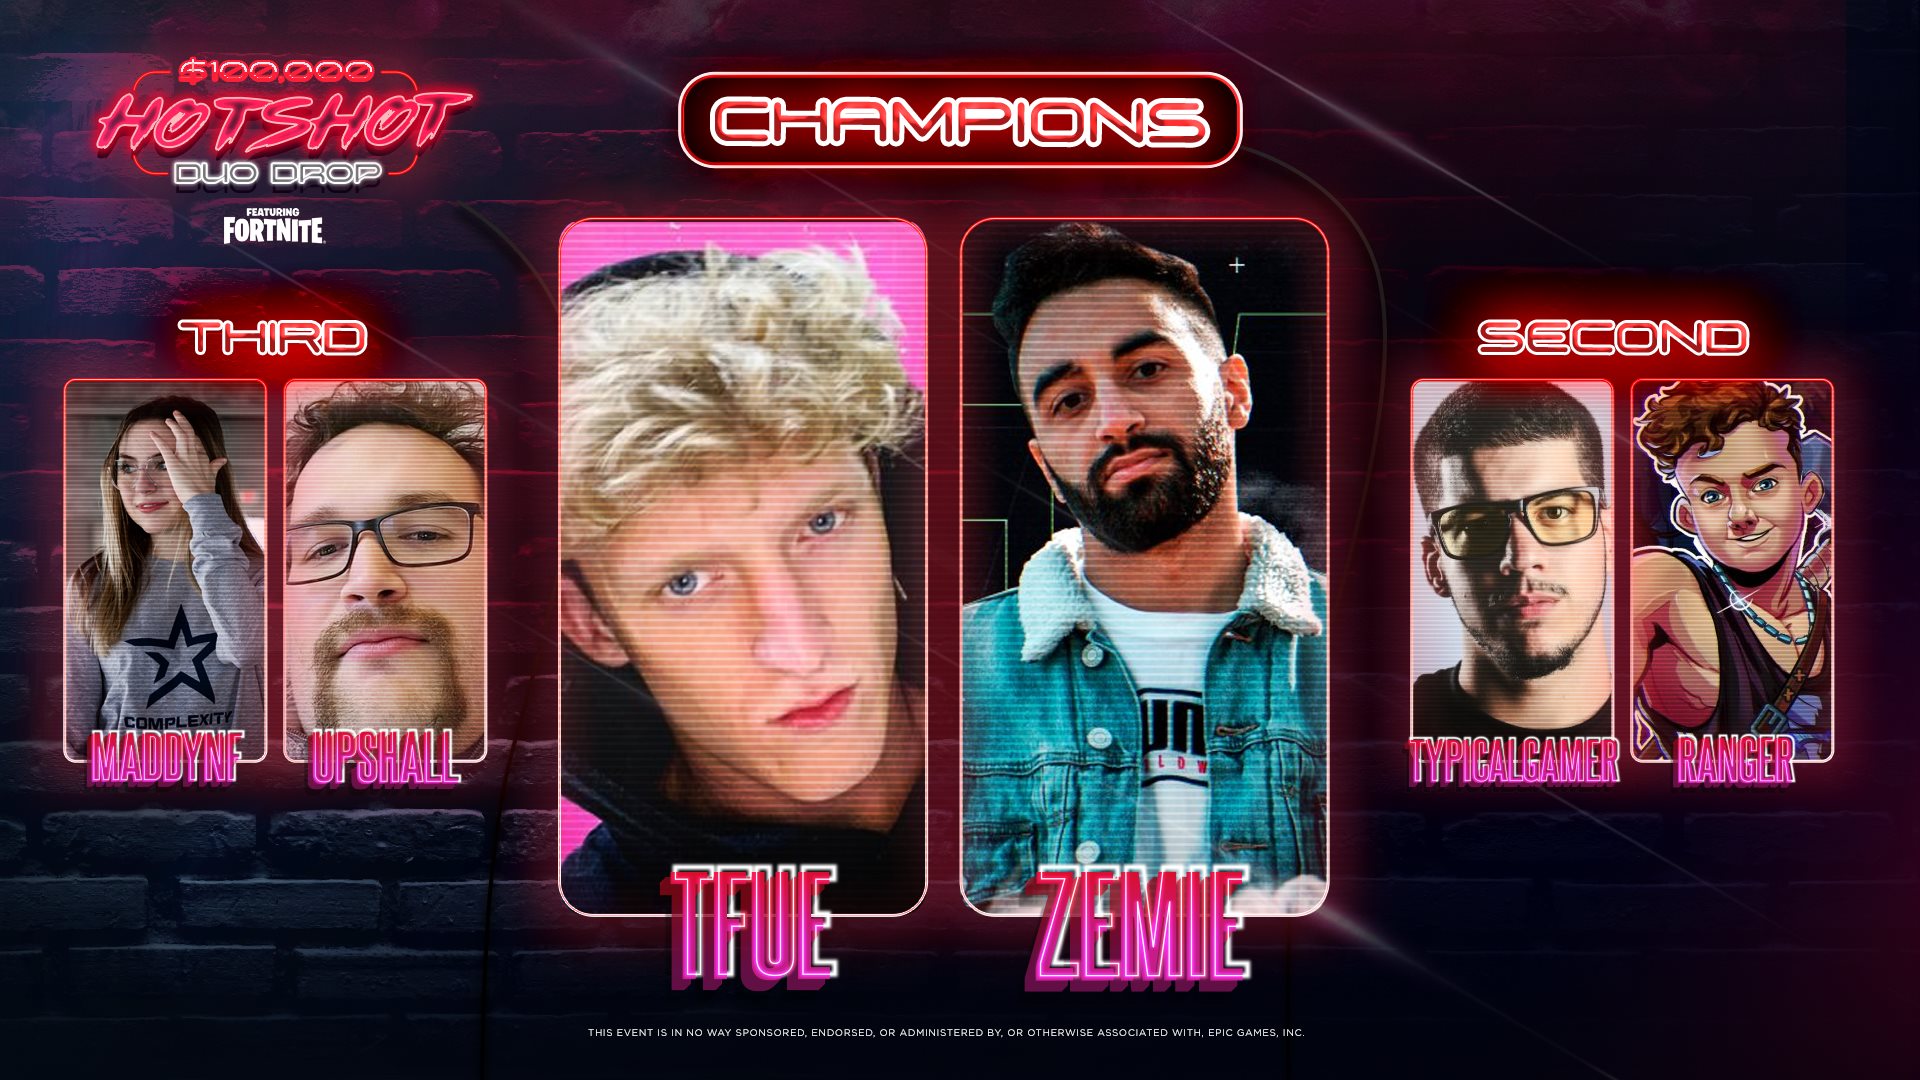 Tfue and Zemie are the HOT SHOT DUO CHAMPS!